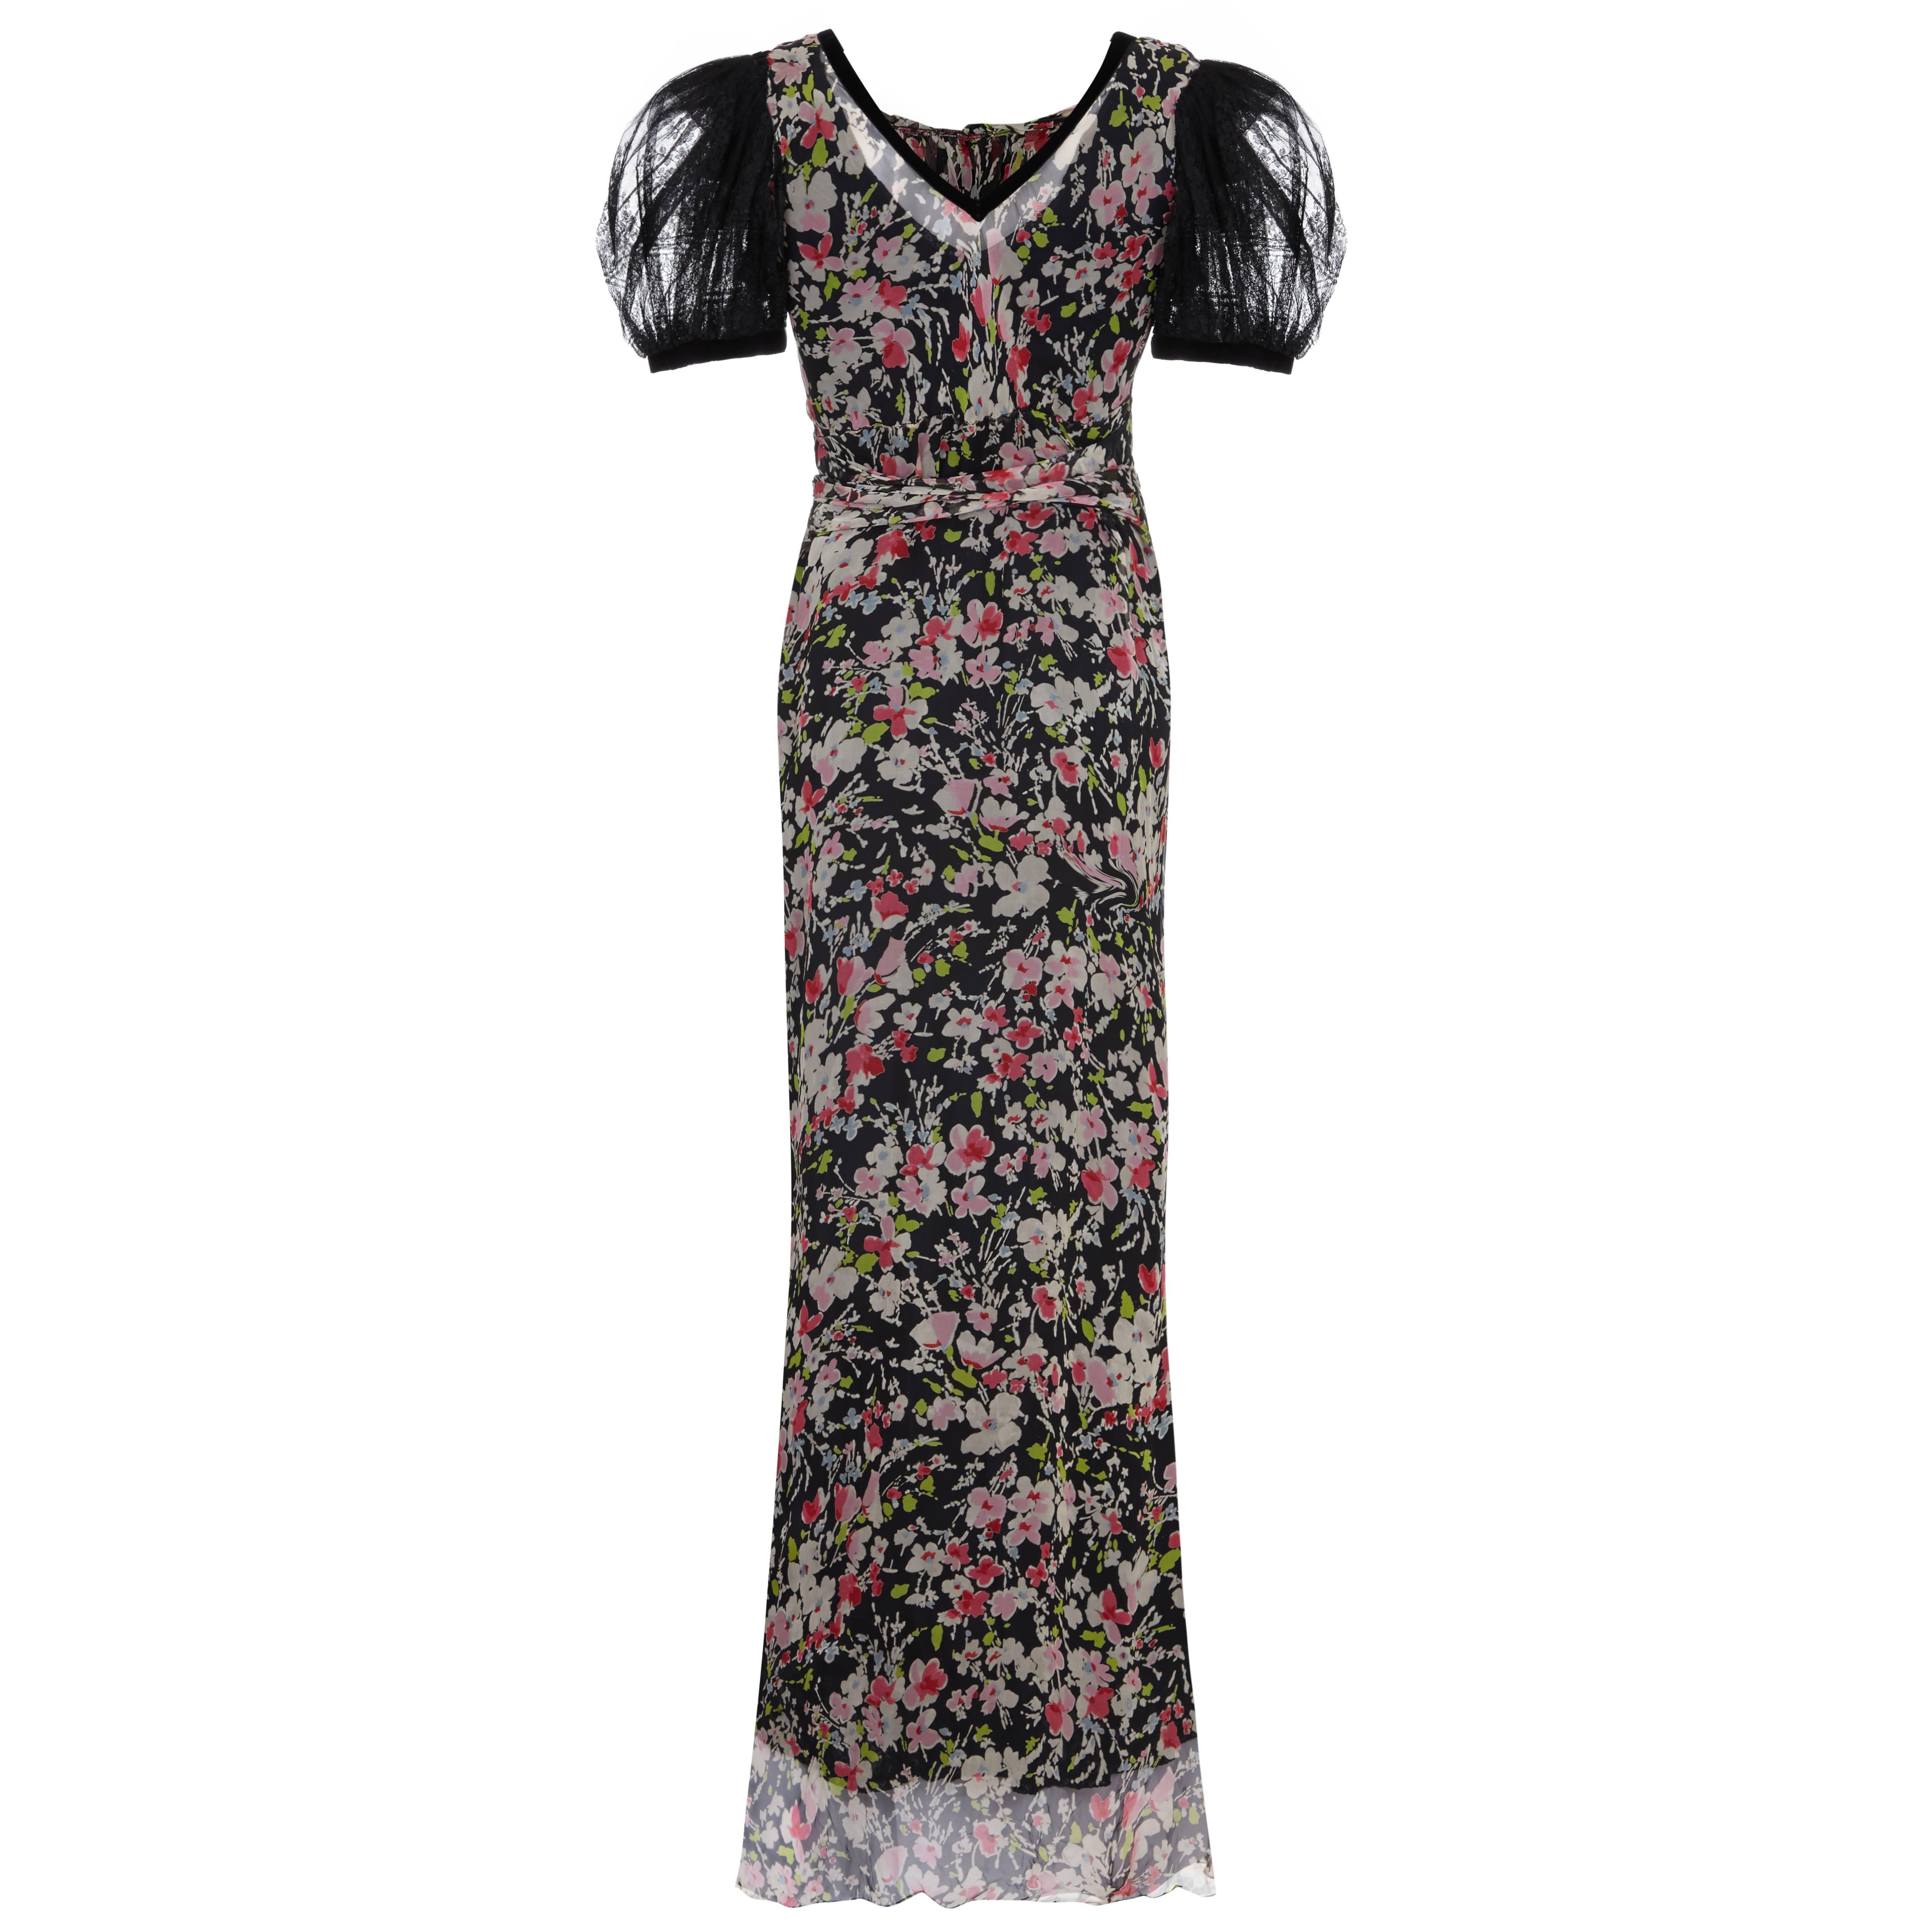 1930s Floral Chiffon Dress with Black Lace Puff Sleeves & Slip 